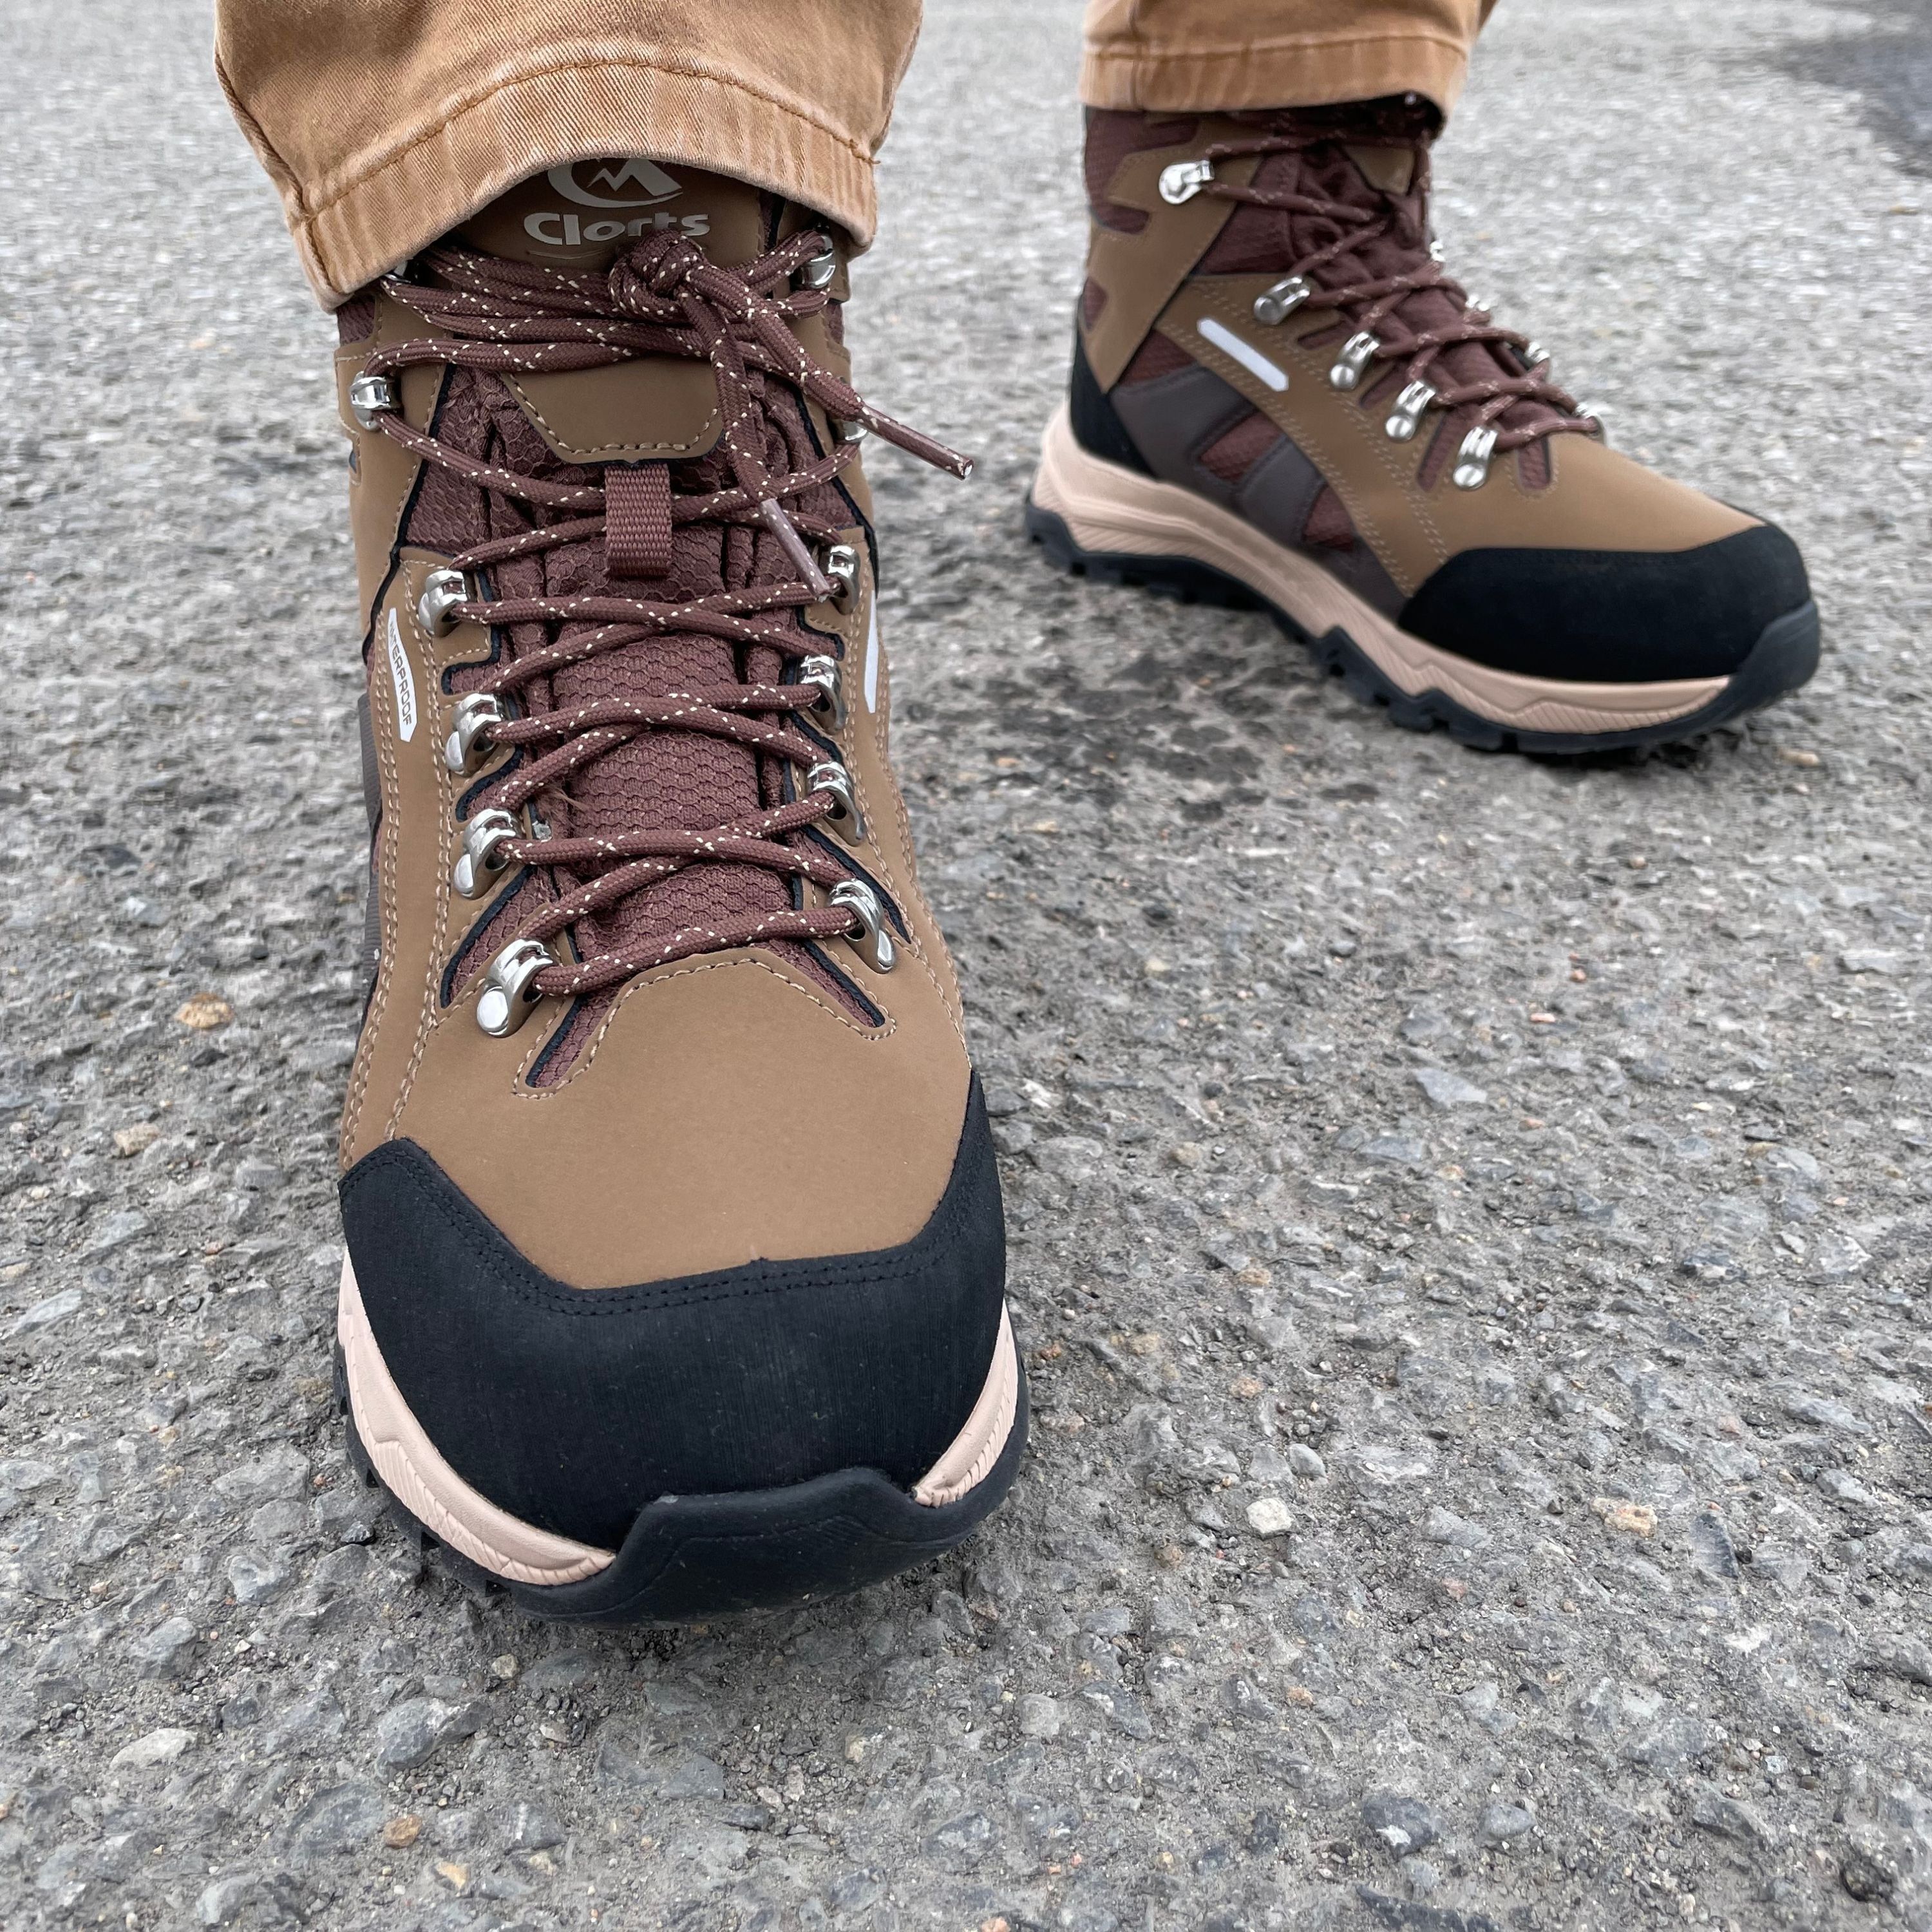 Hiking boots - Men's